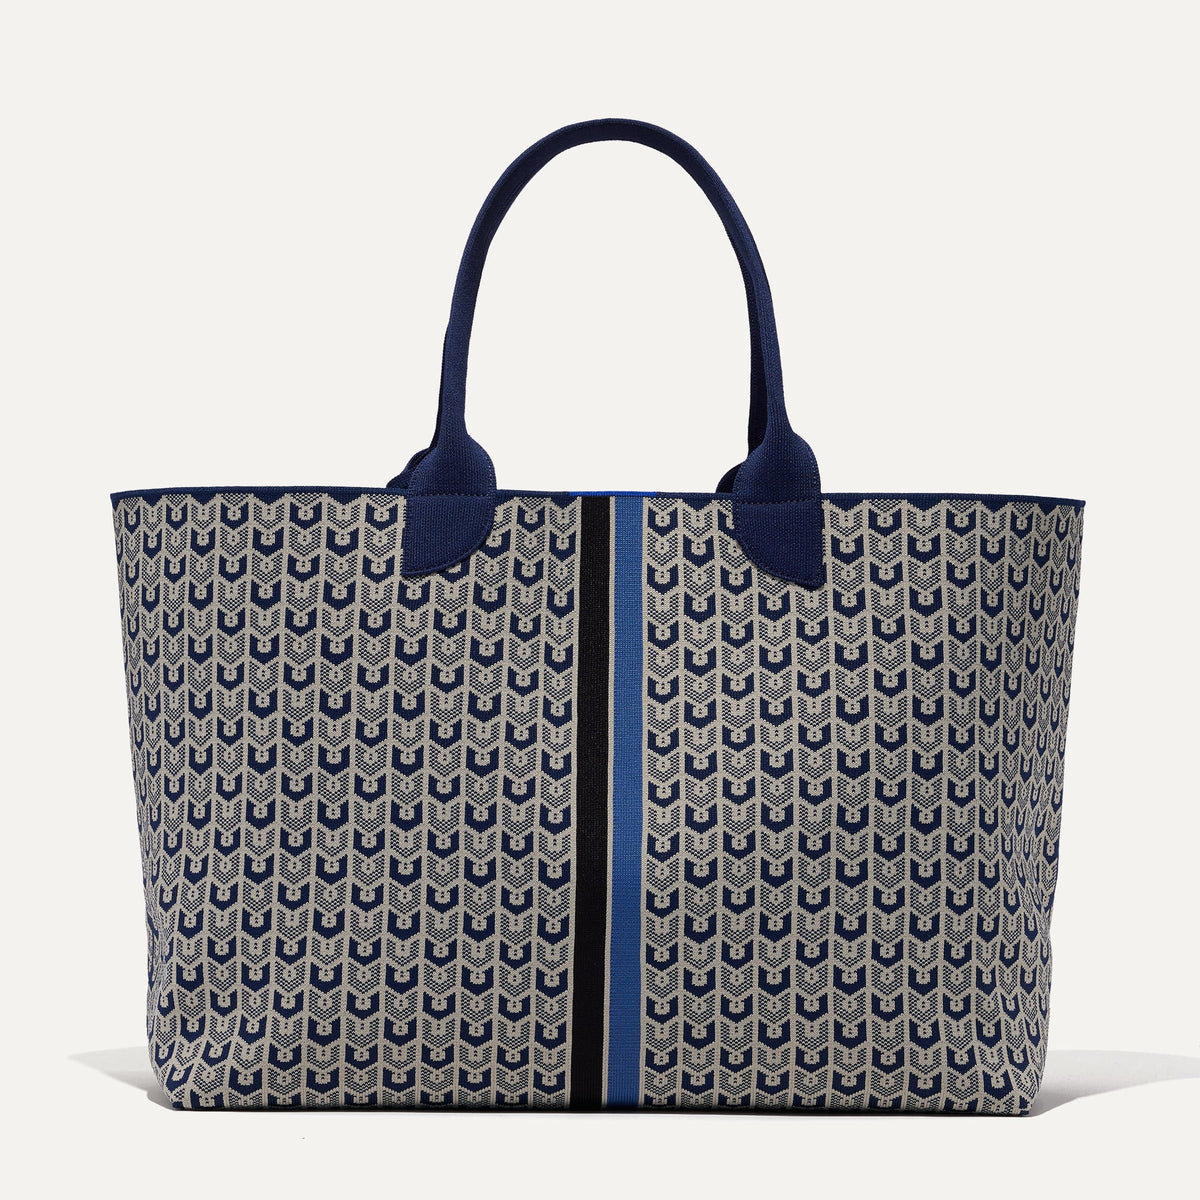 Official MOYNAT Thread, Page 540